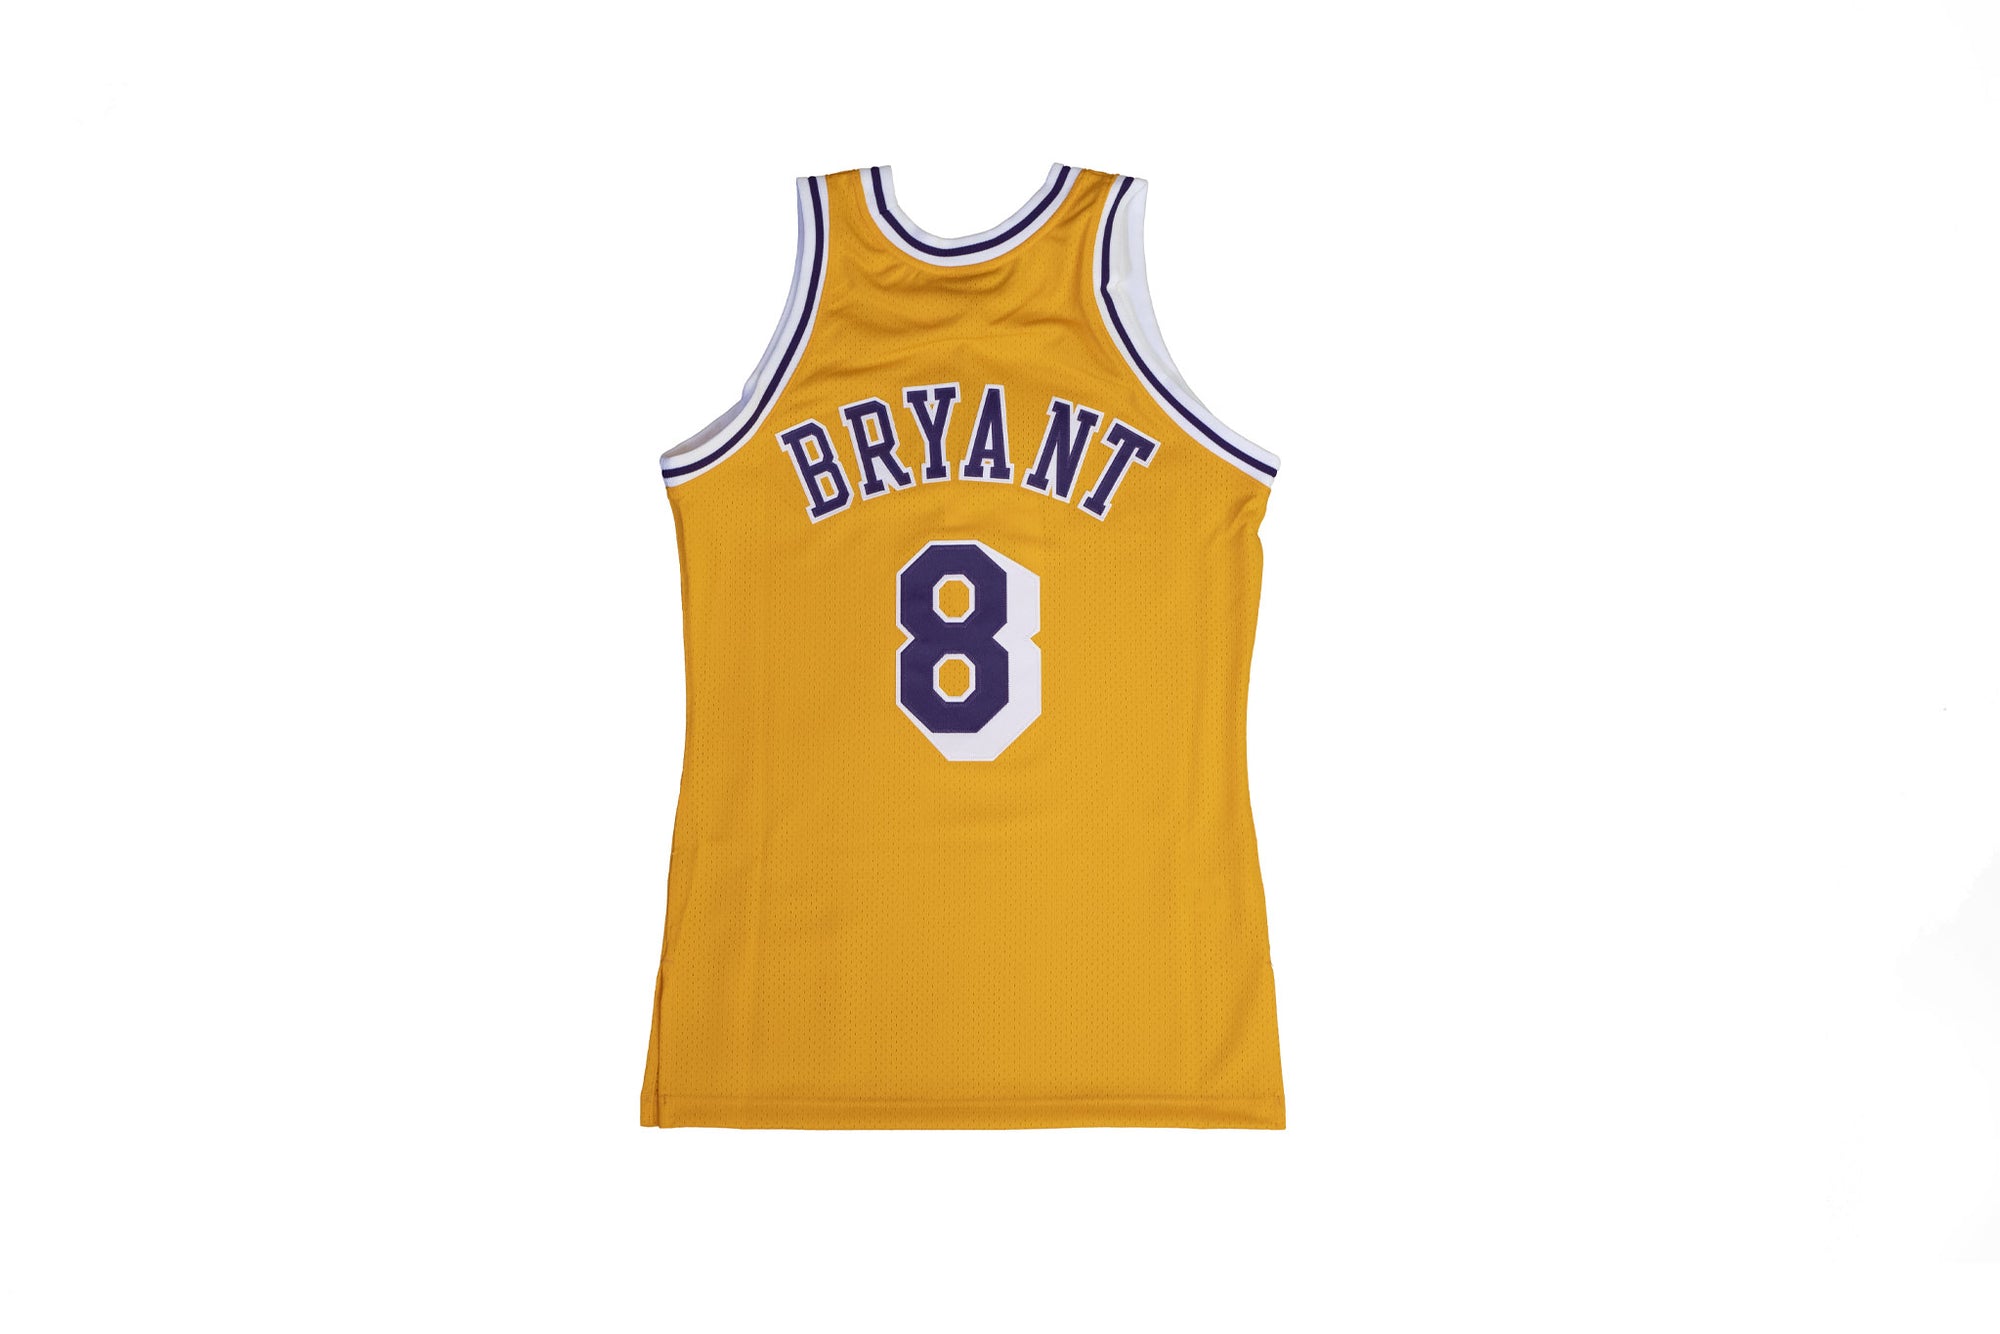 Authentic 1996-2016 Hall Of Fame Kobe Bryant Los Angeles Lakers